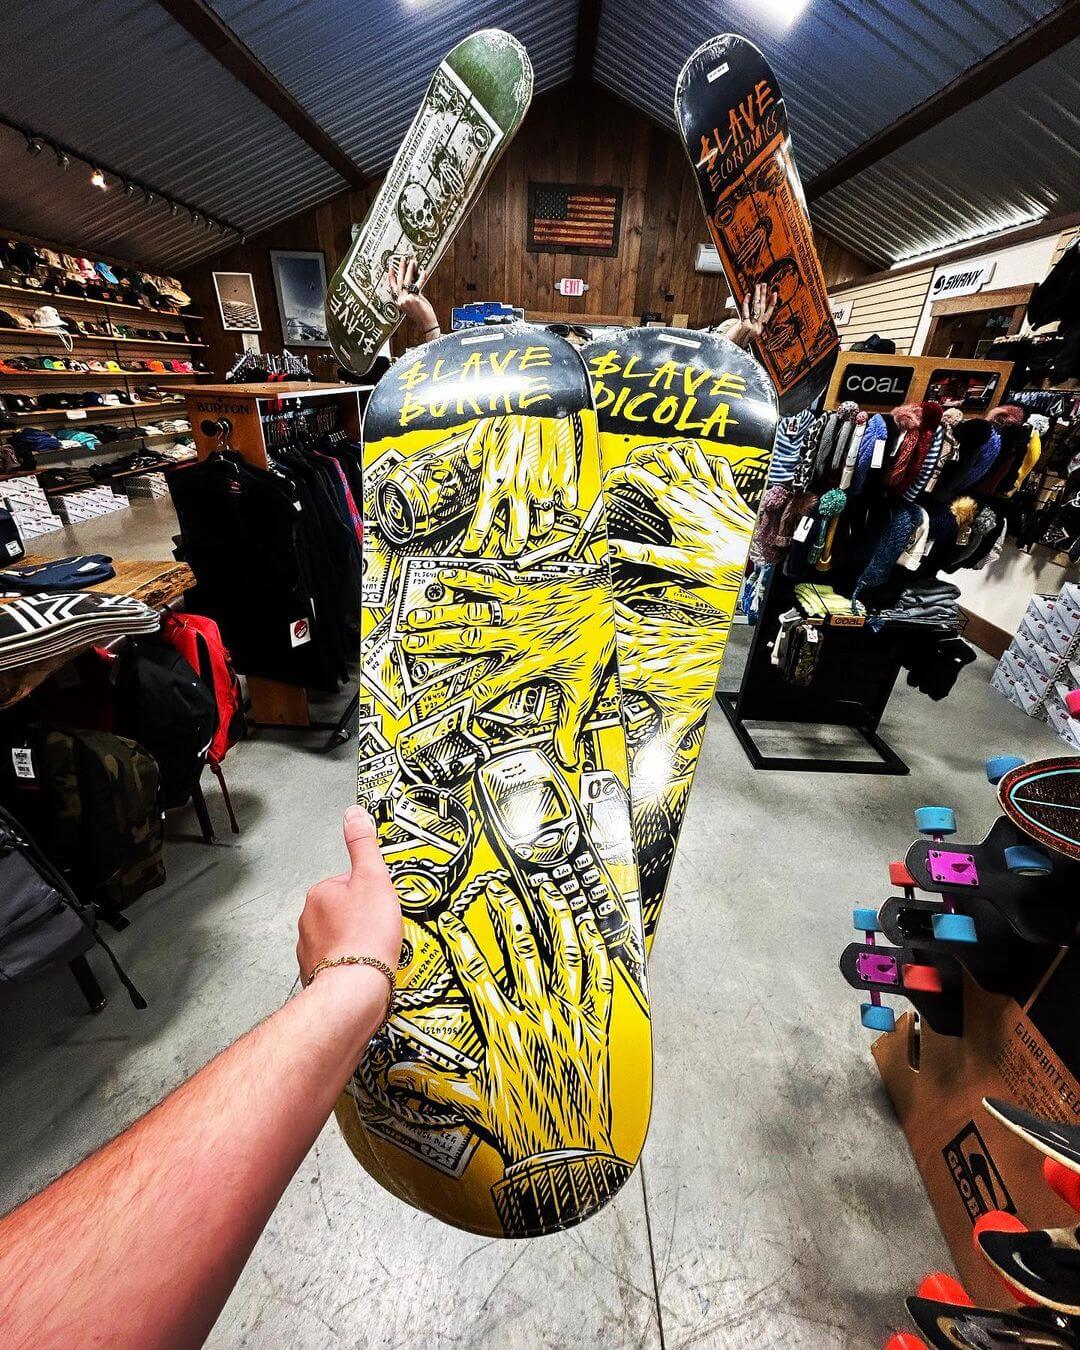 newly arrived skate decks at Backwoods Snowboards and Skateboards in Auburn Maine